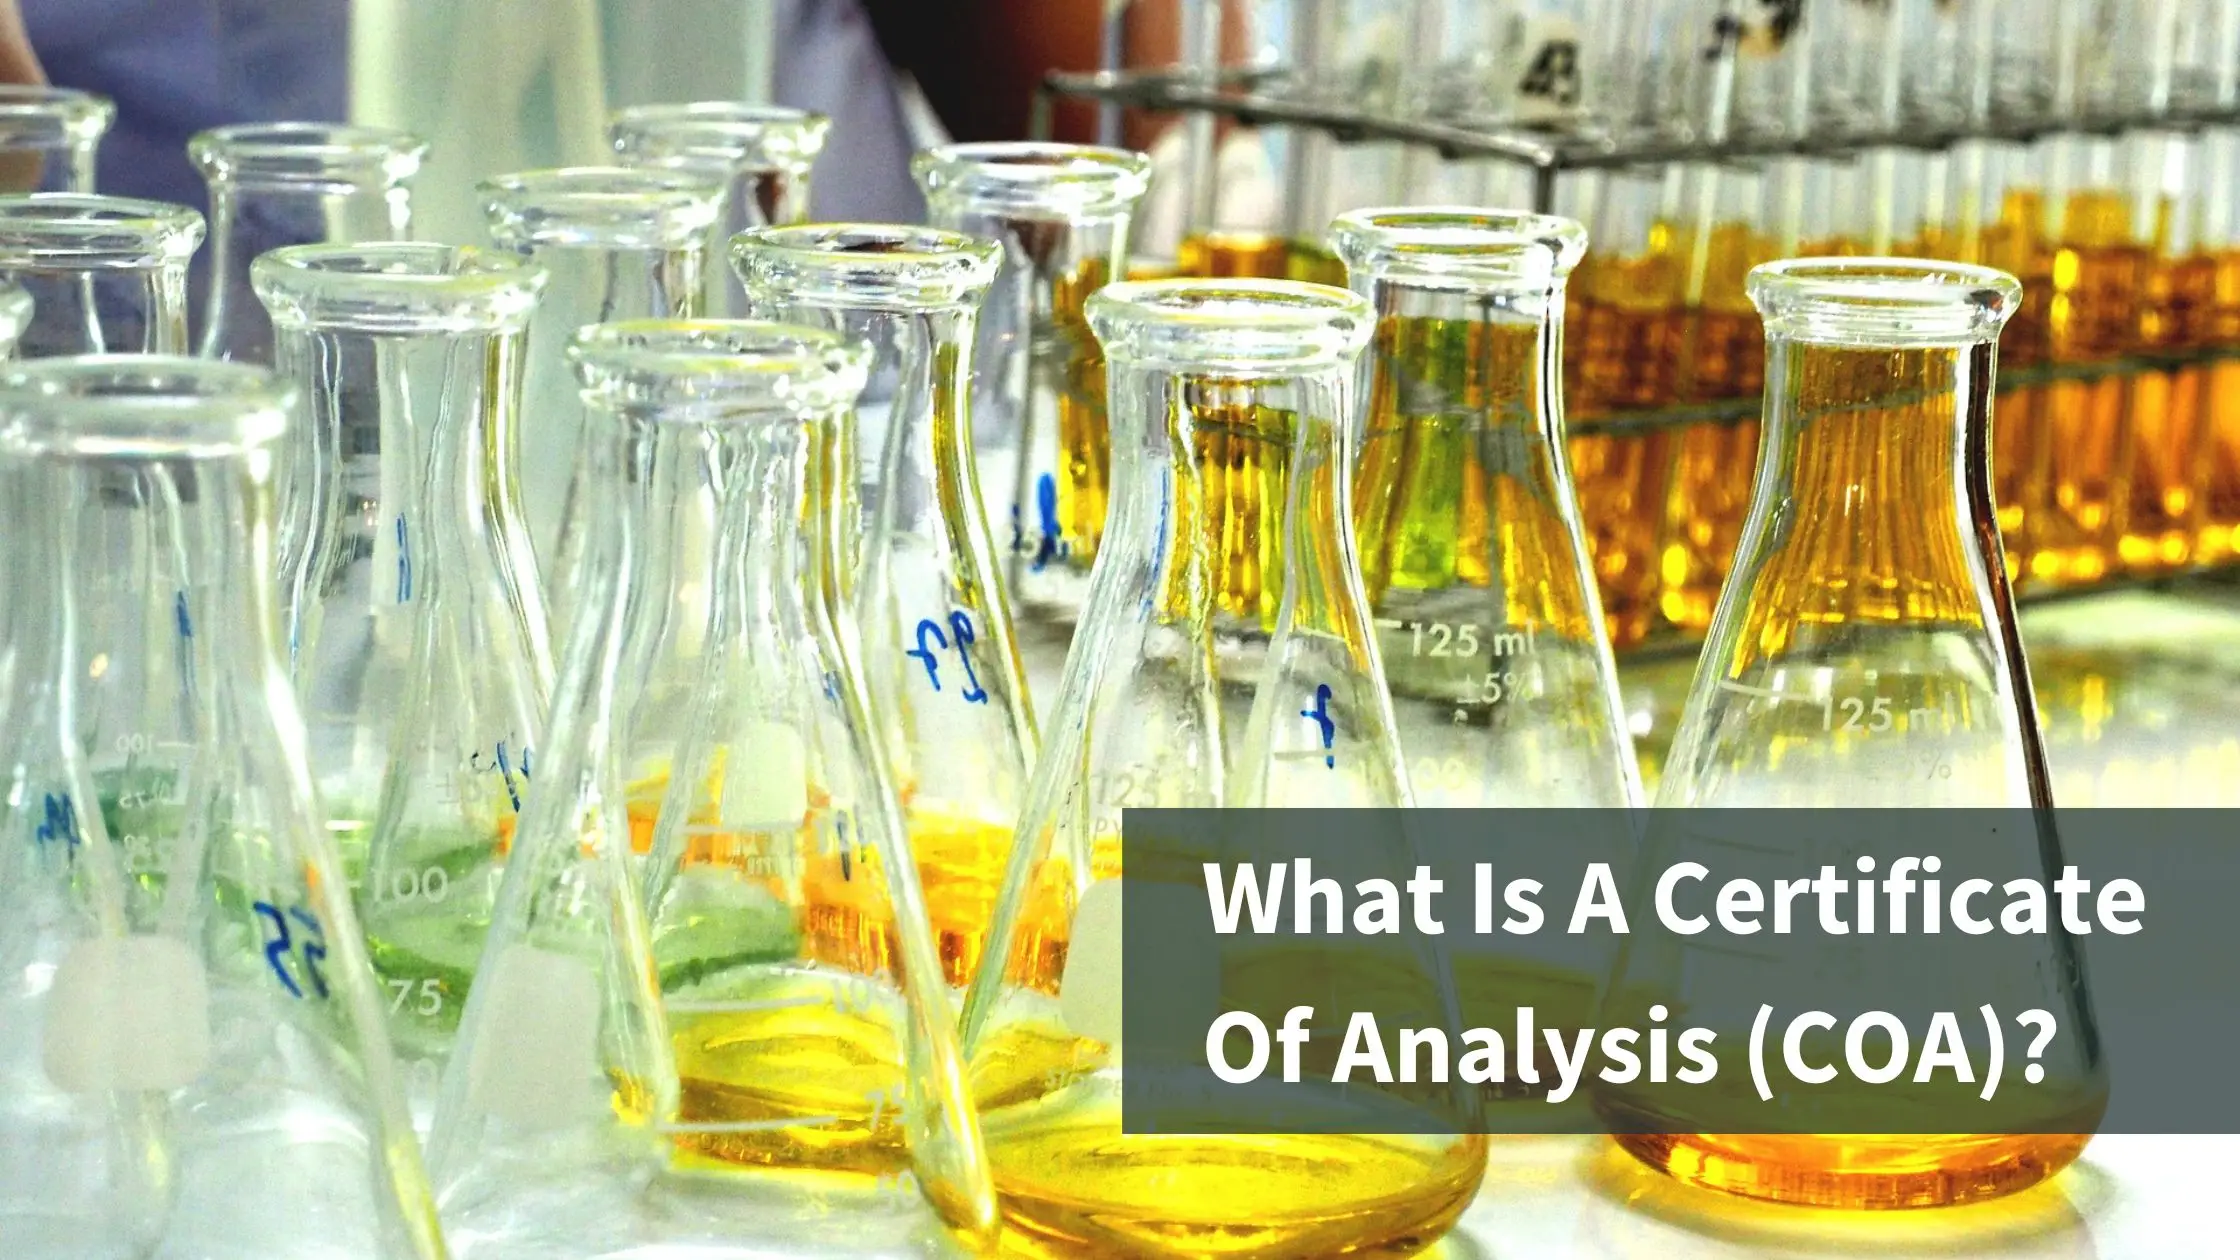 What Is A Certificate Of Analysis?